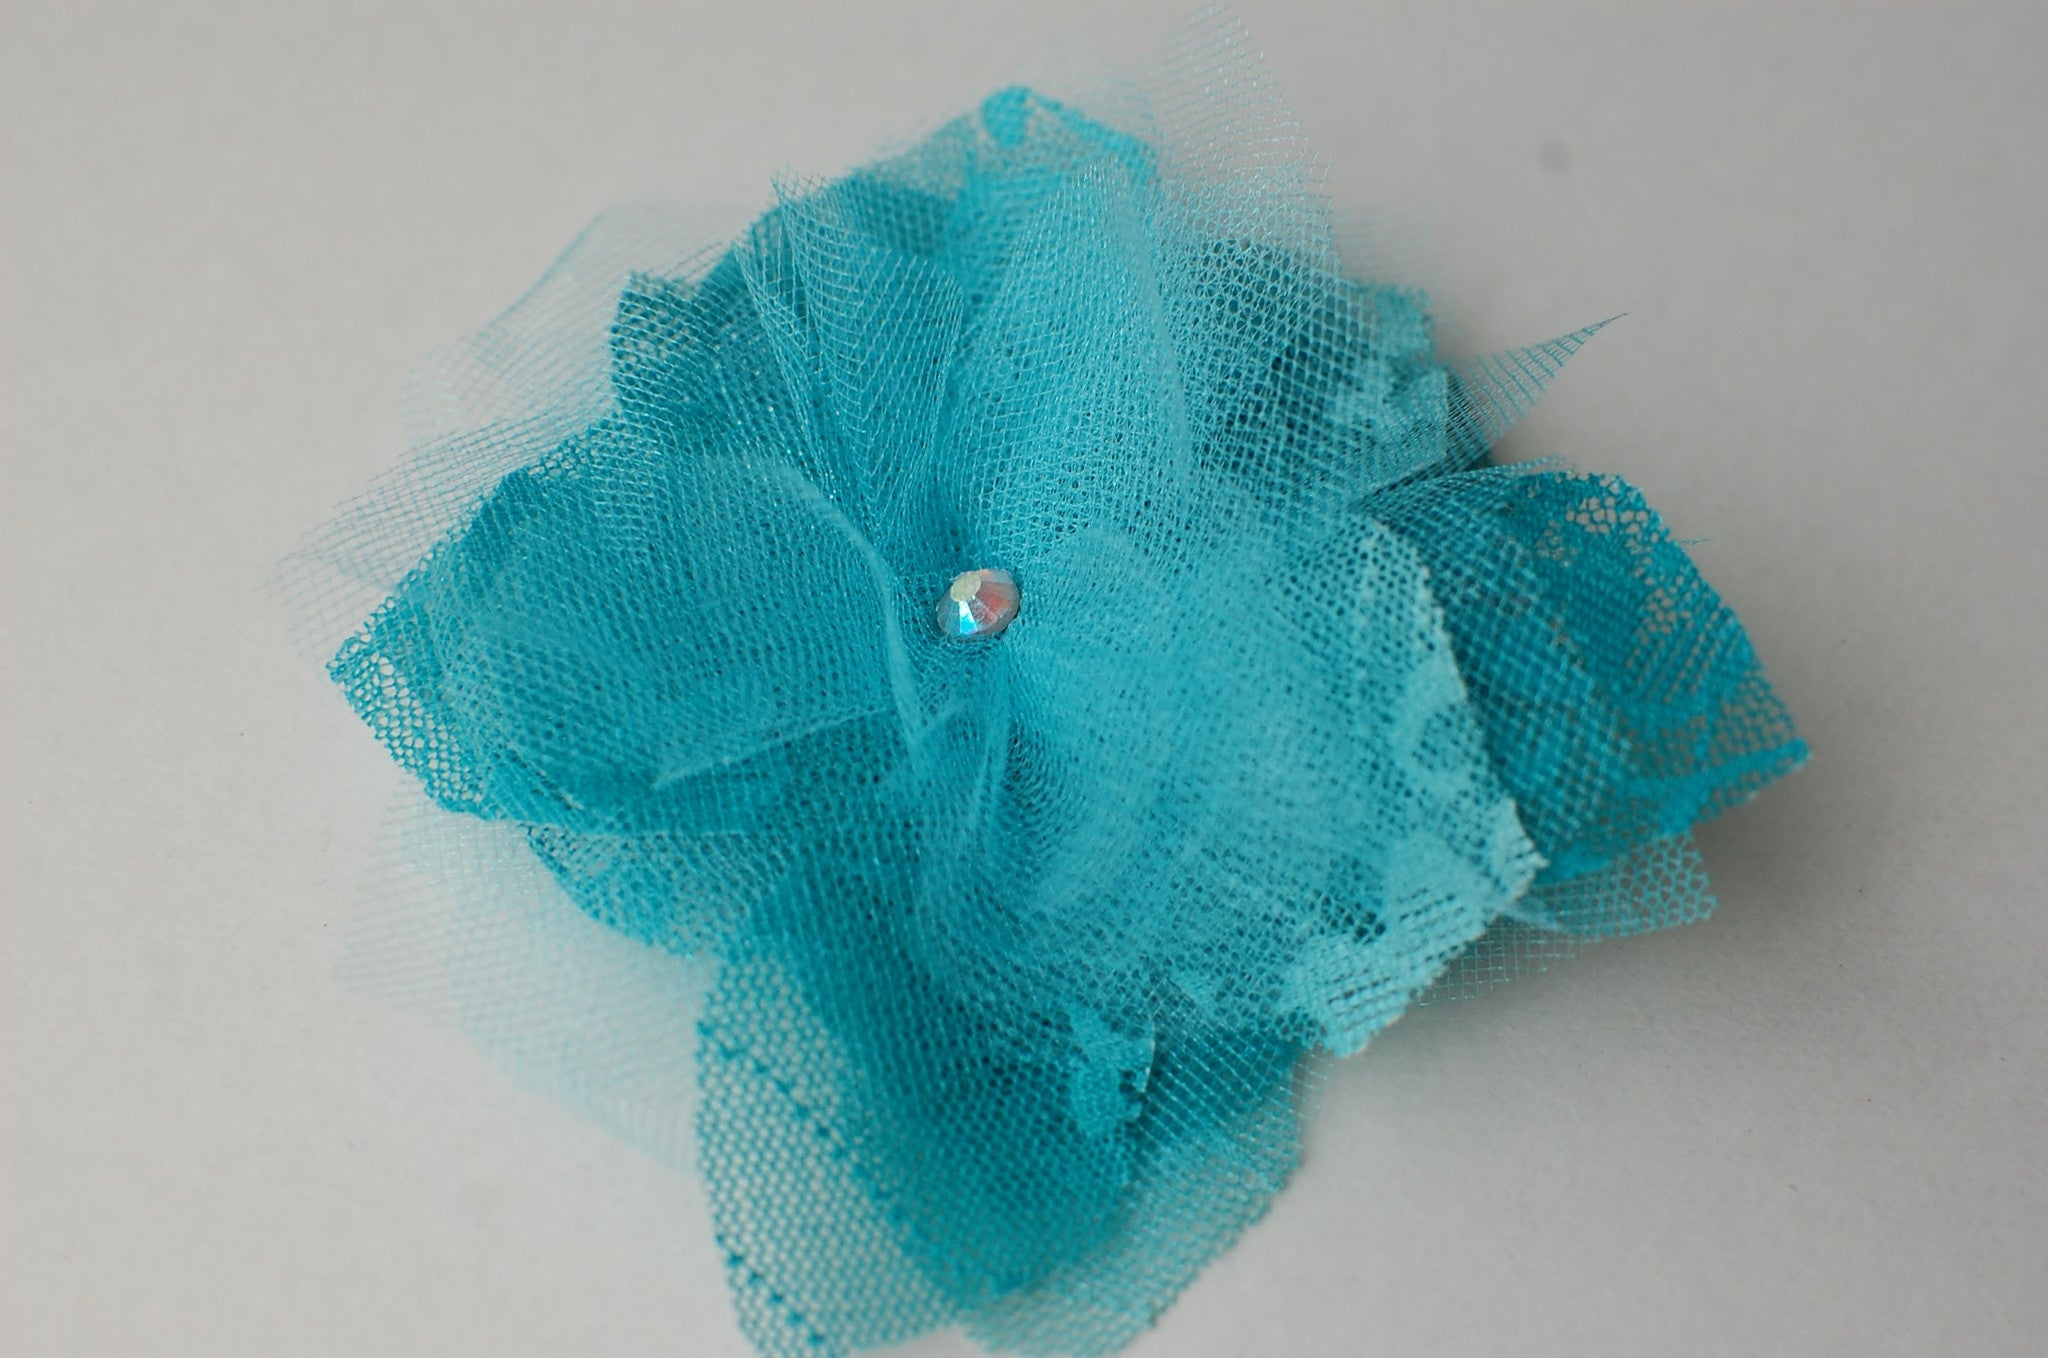 Emerald green flower hair clip/brooch with tulle